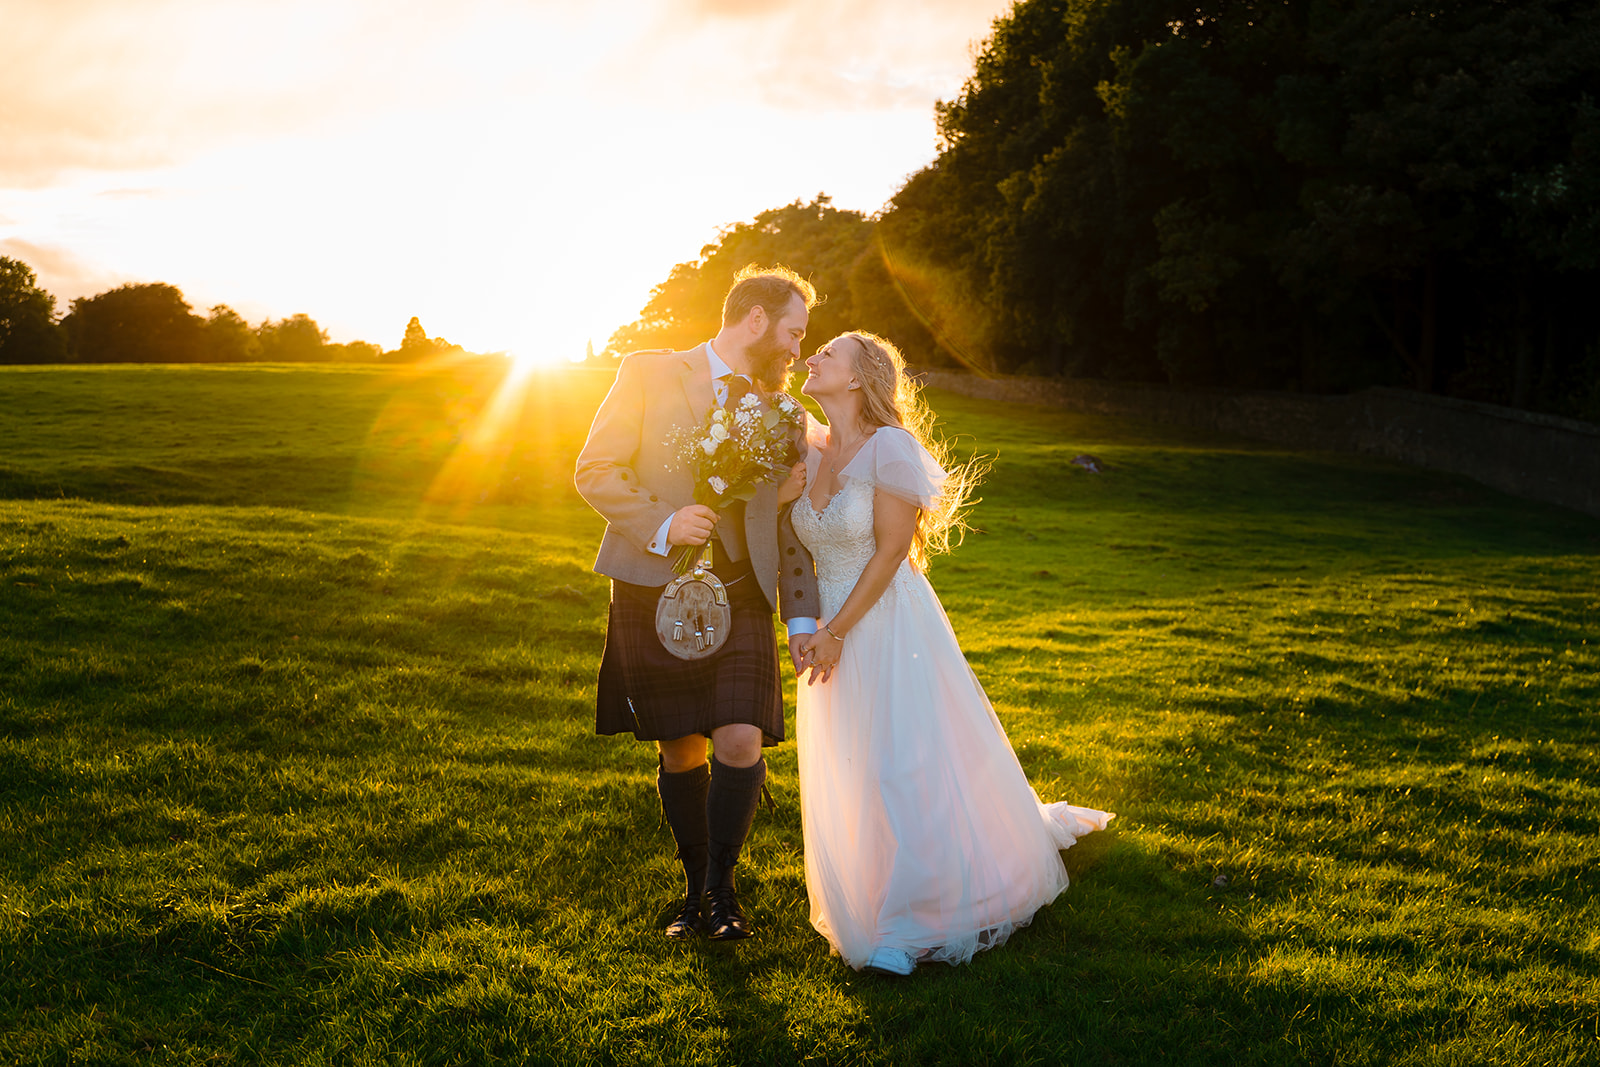 A couple who got married on the Broughton hall estate, sunset in background